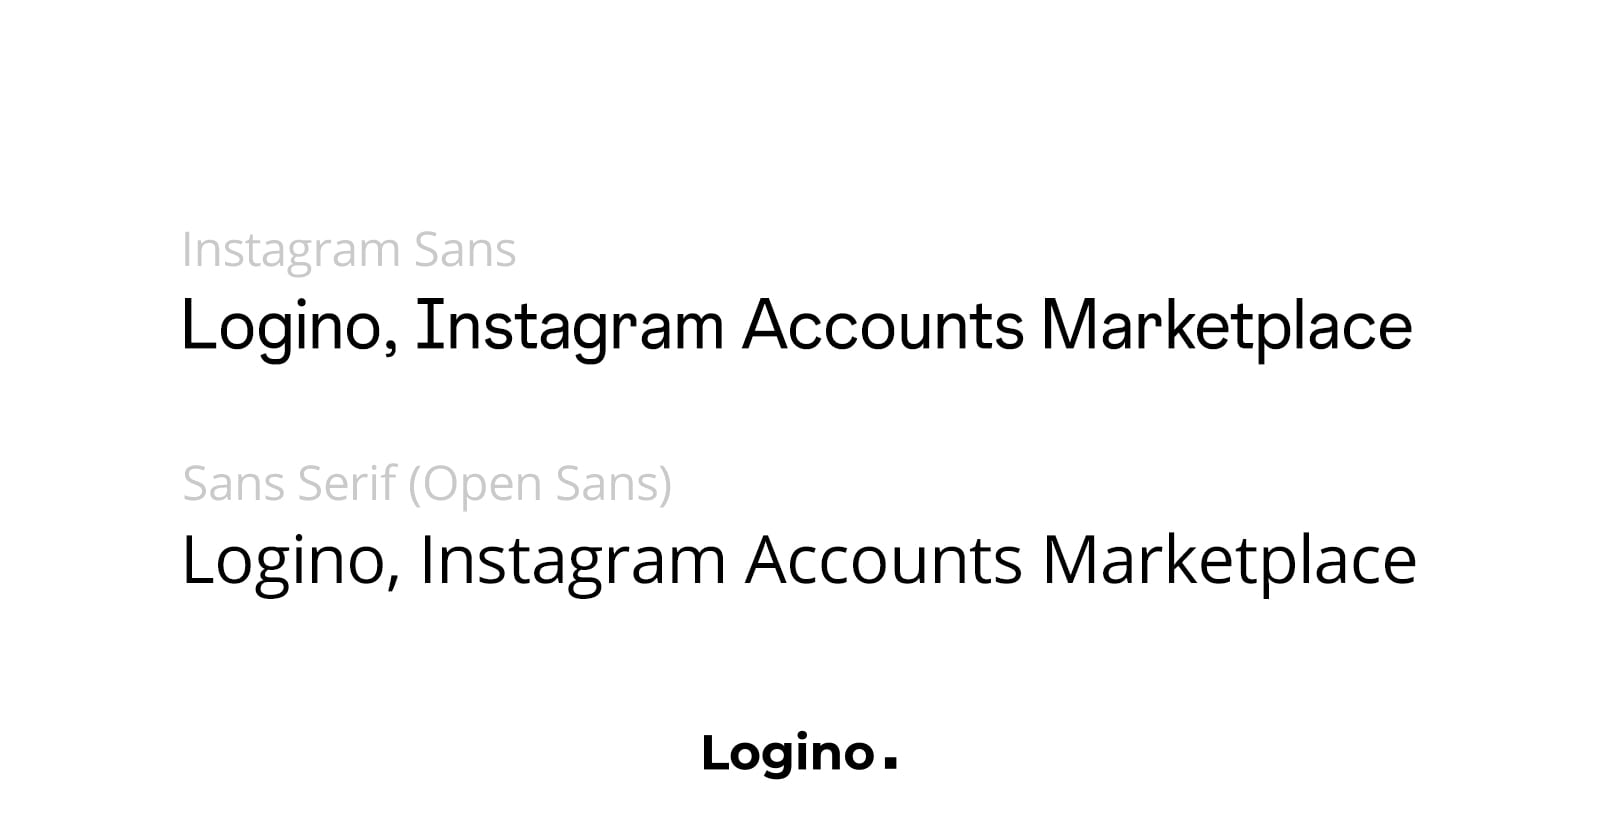 The Instagram Sans font is very similar to the Sans-Serif fonts.